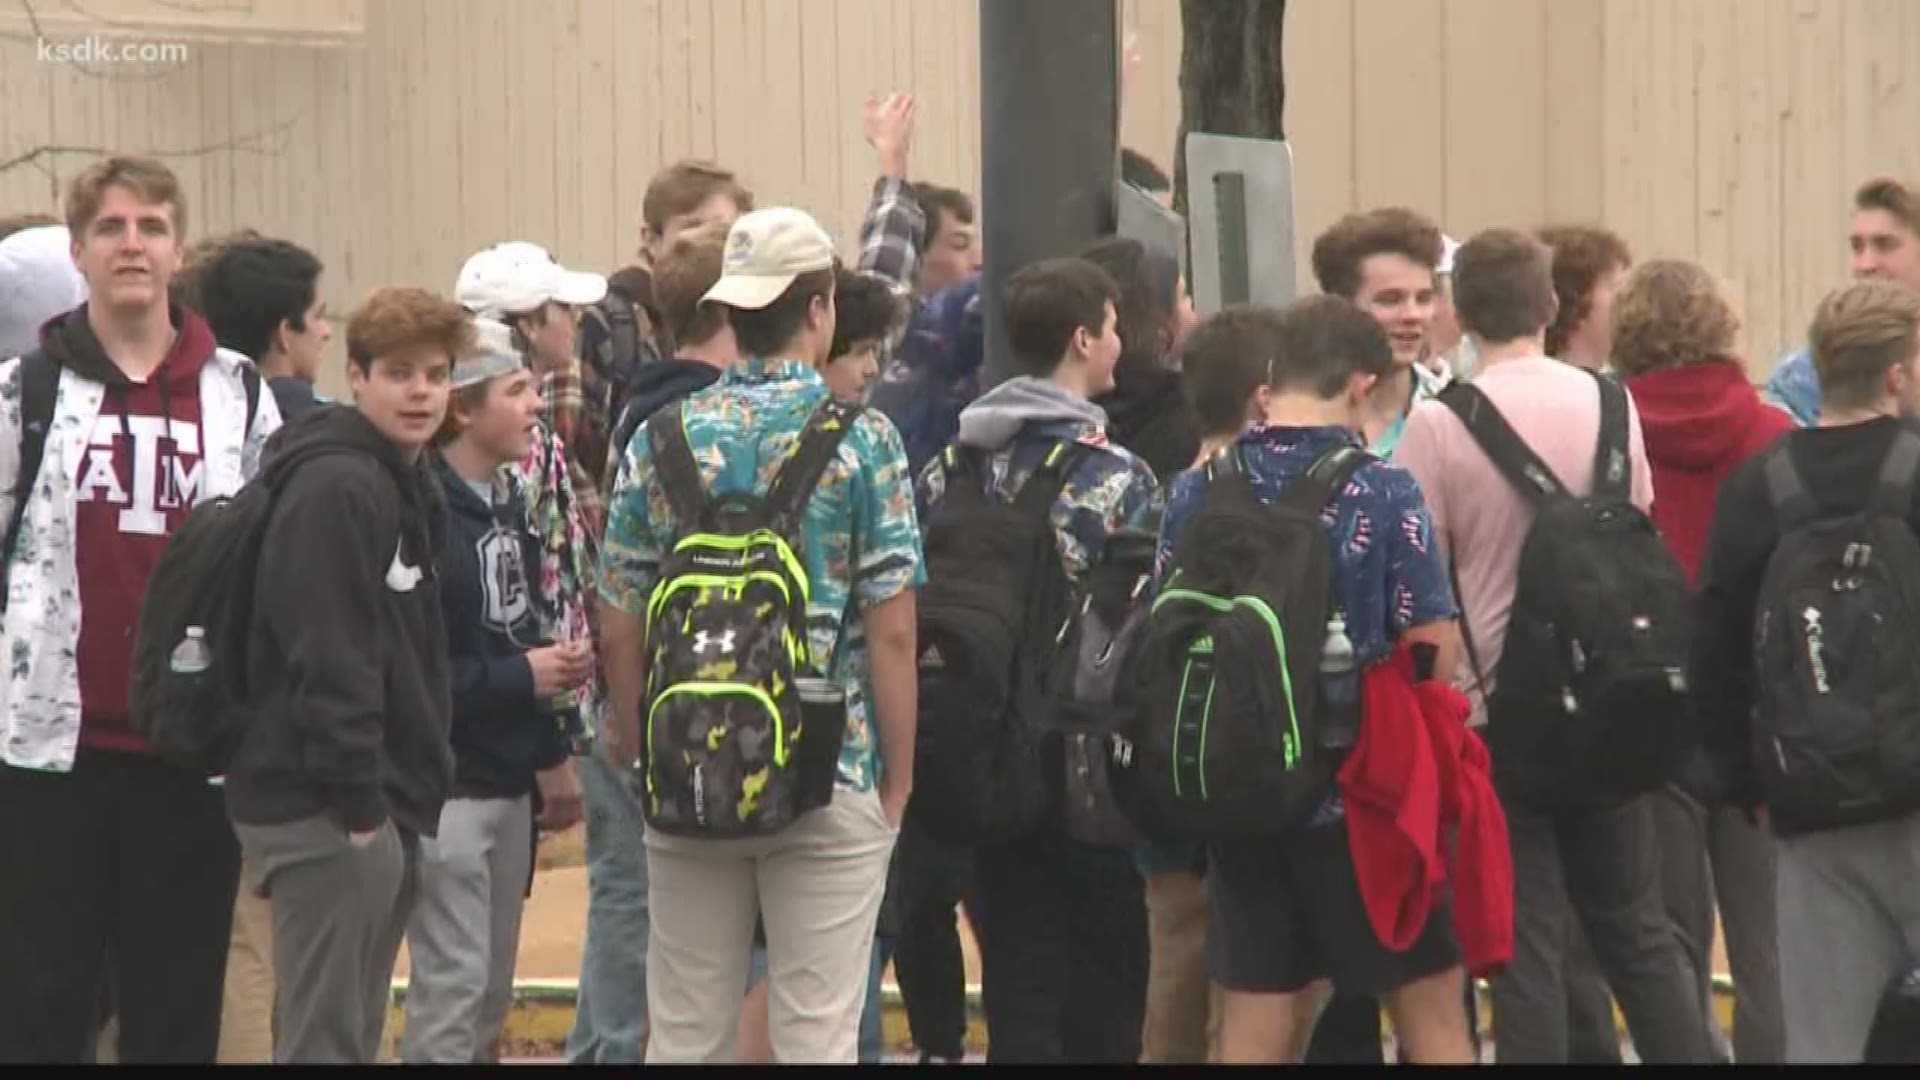 Students walked out of class today at Parkway South High School to protest the banning of a popular substitute teacher.